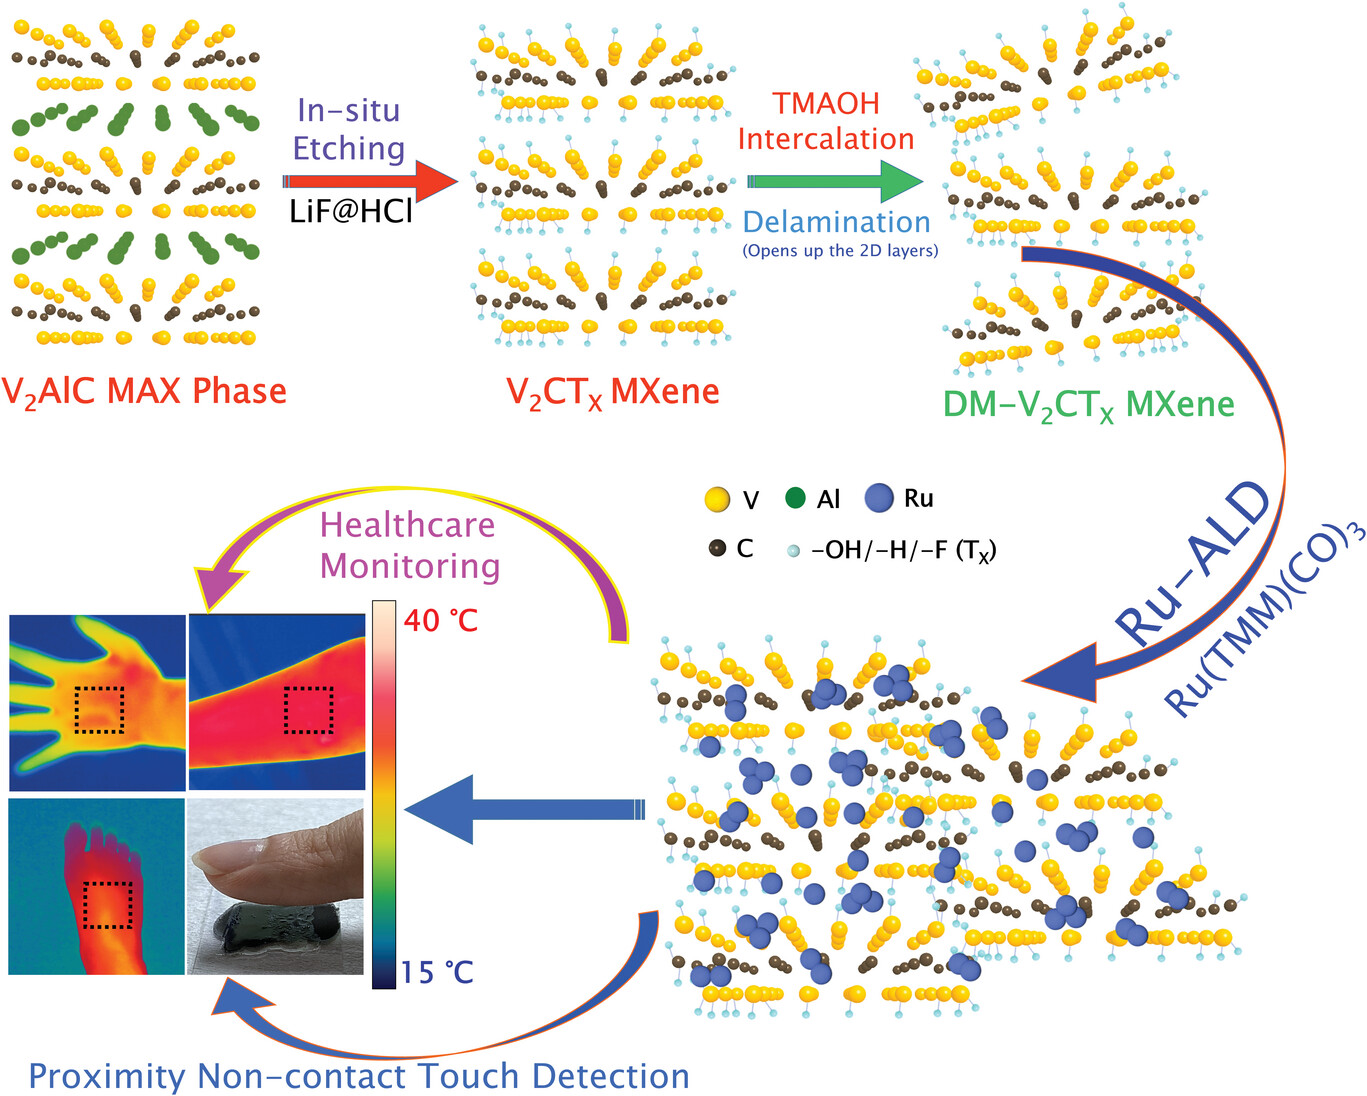 As-synthesized bulk quantity delaminated V2CTX MXene (DM-V2CTX) to develop Ru-ALD Engineered DM-V2CTX (Ru@DM-V2CTX) for real-time skin temperature sensing, noncontact touch, and breathing monitoring